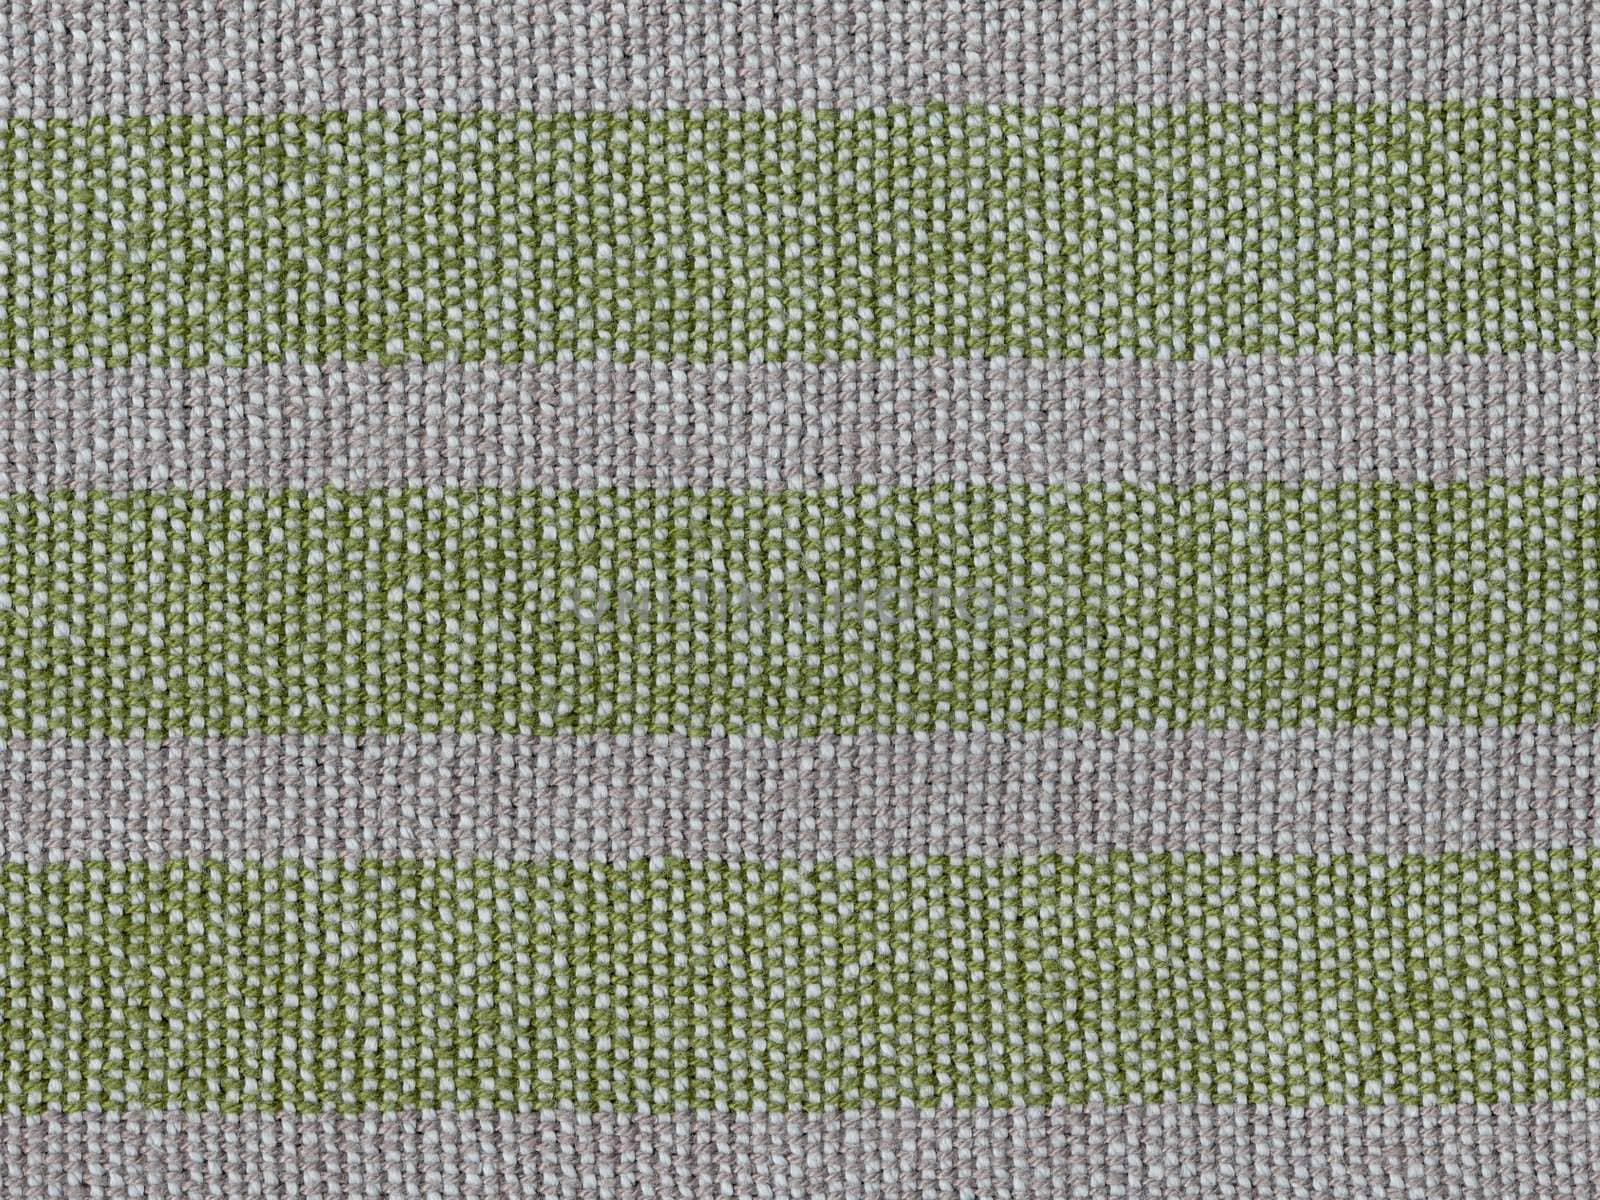 A close-up background of oldfashioned hand-woven flax linen with a rough structure and trendy green and grey stripes.